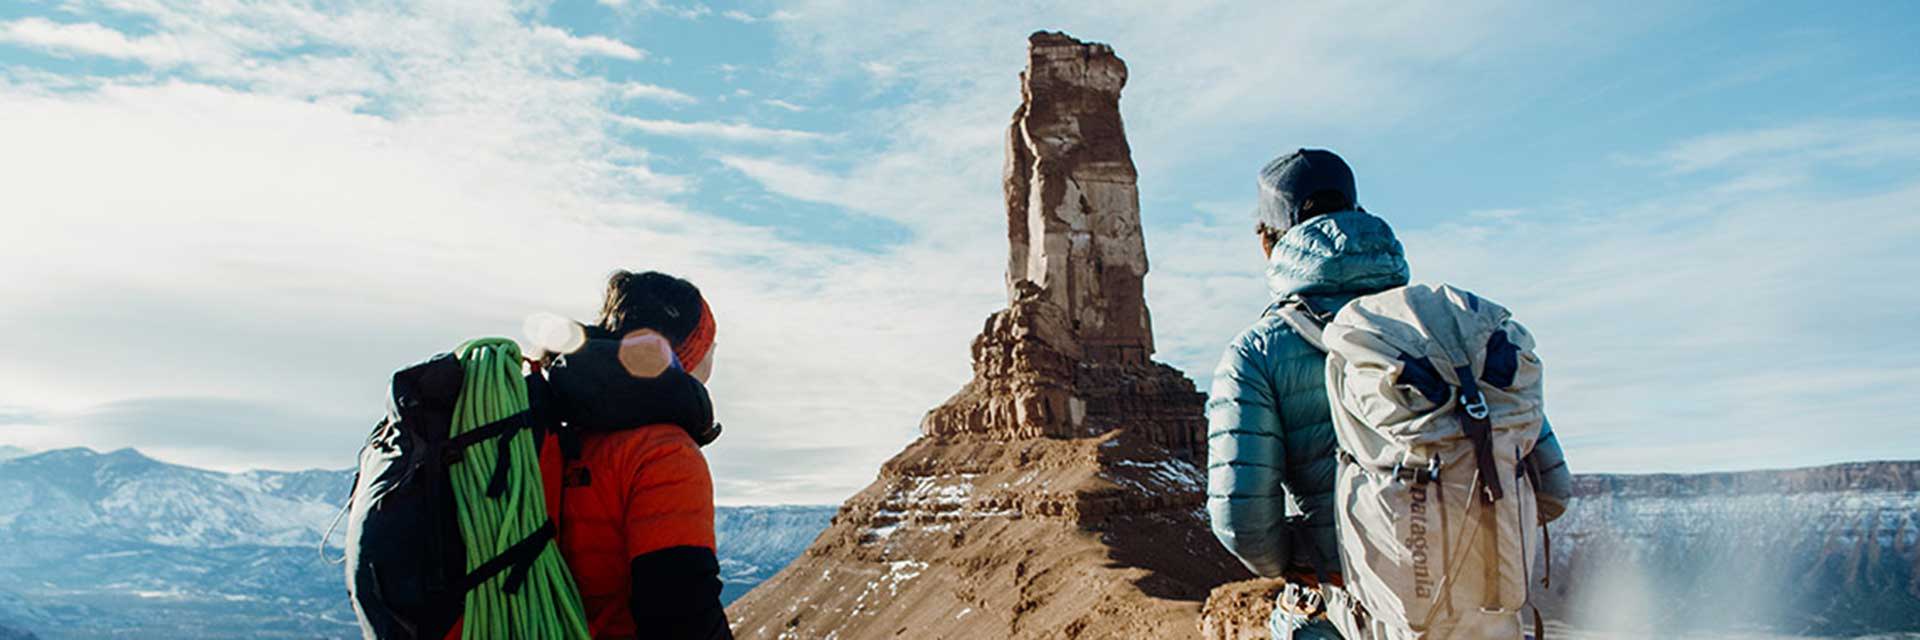 image of Climbers looking out at rock structure